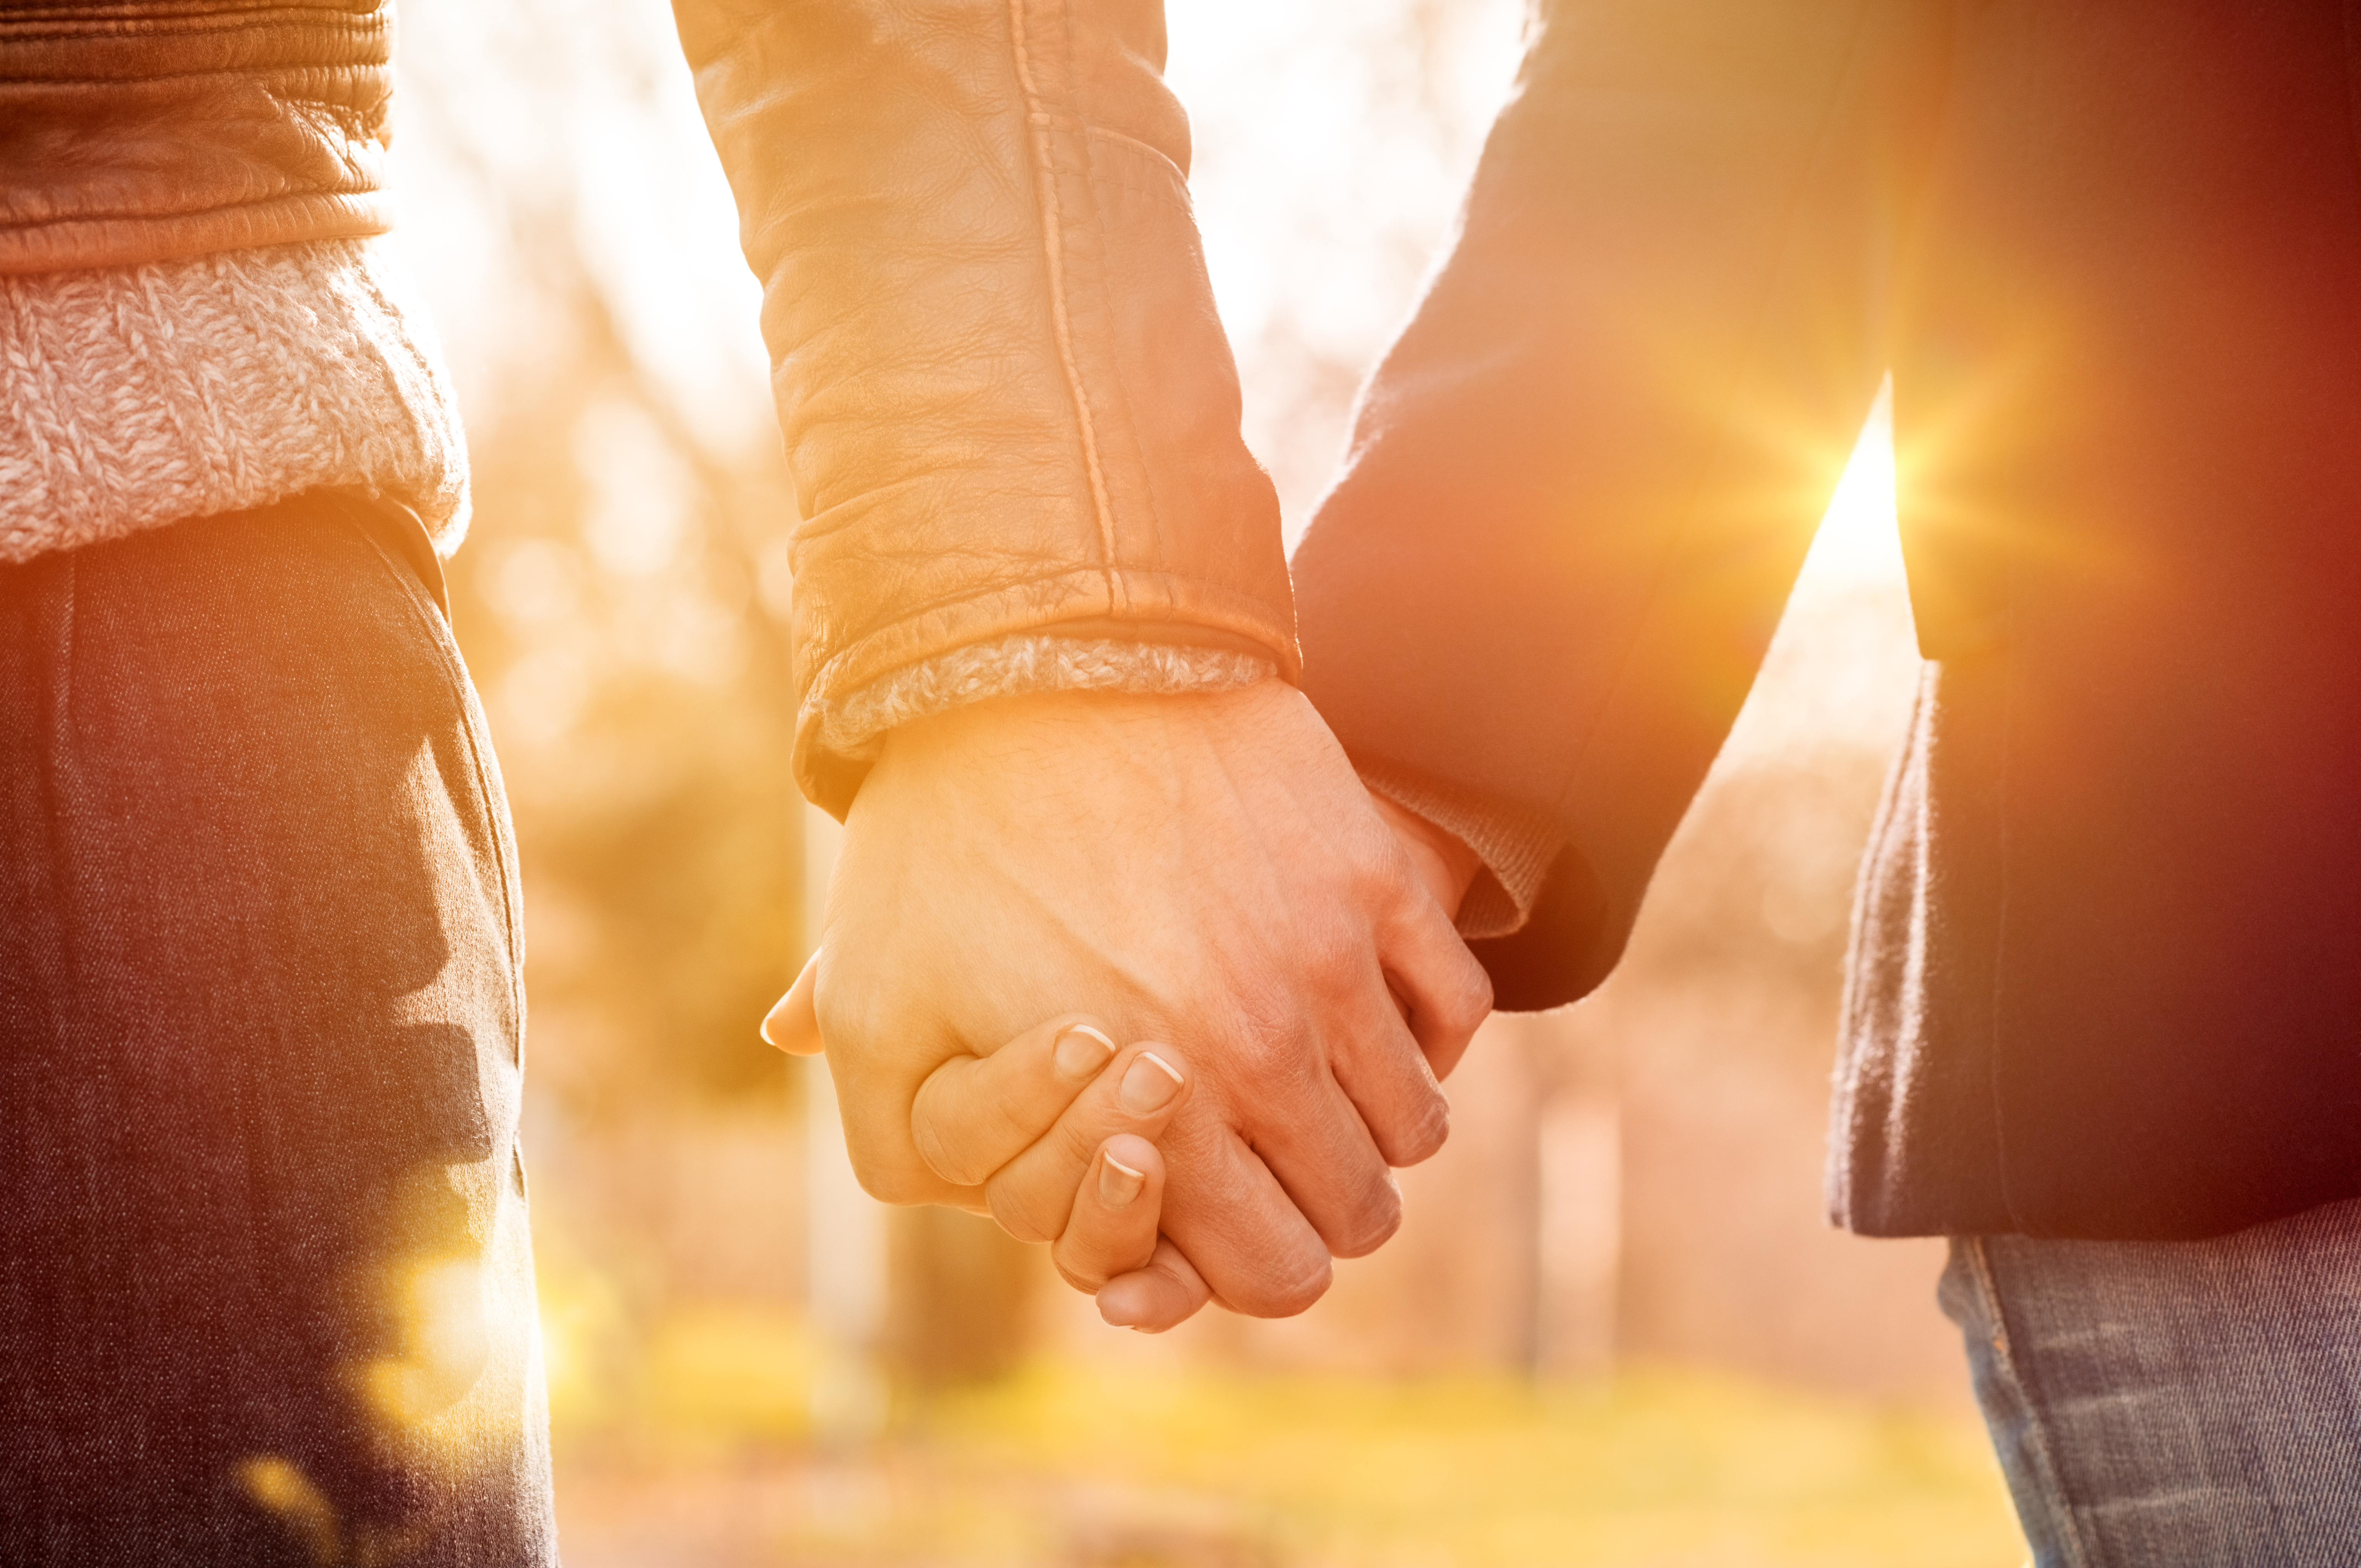 A couple holding hands | Source: Shutterstock